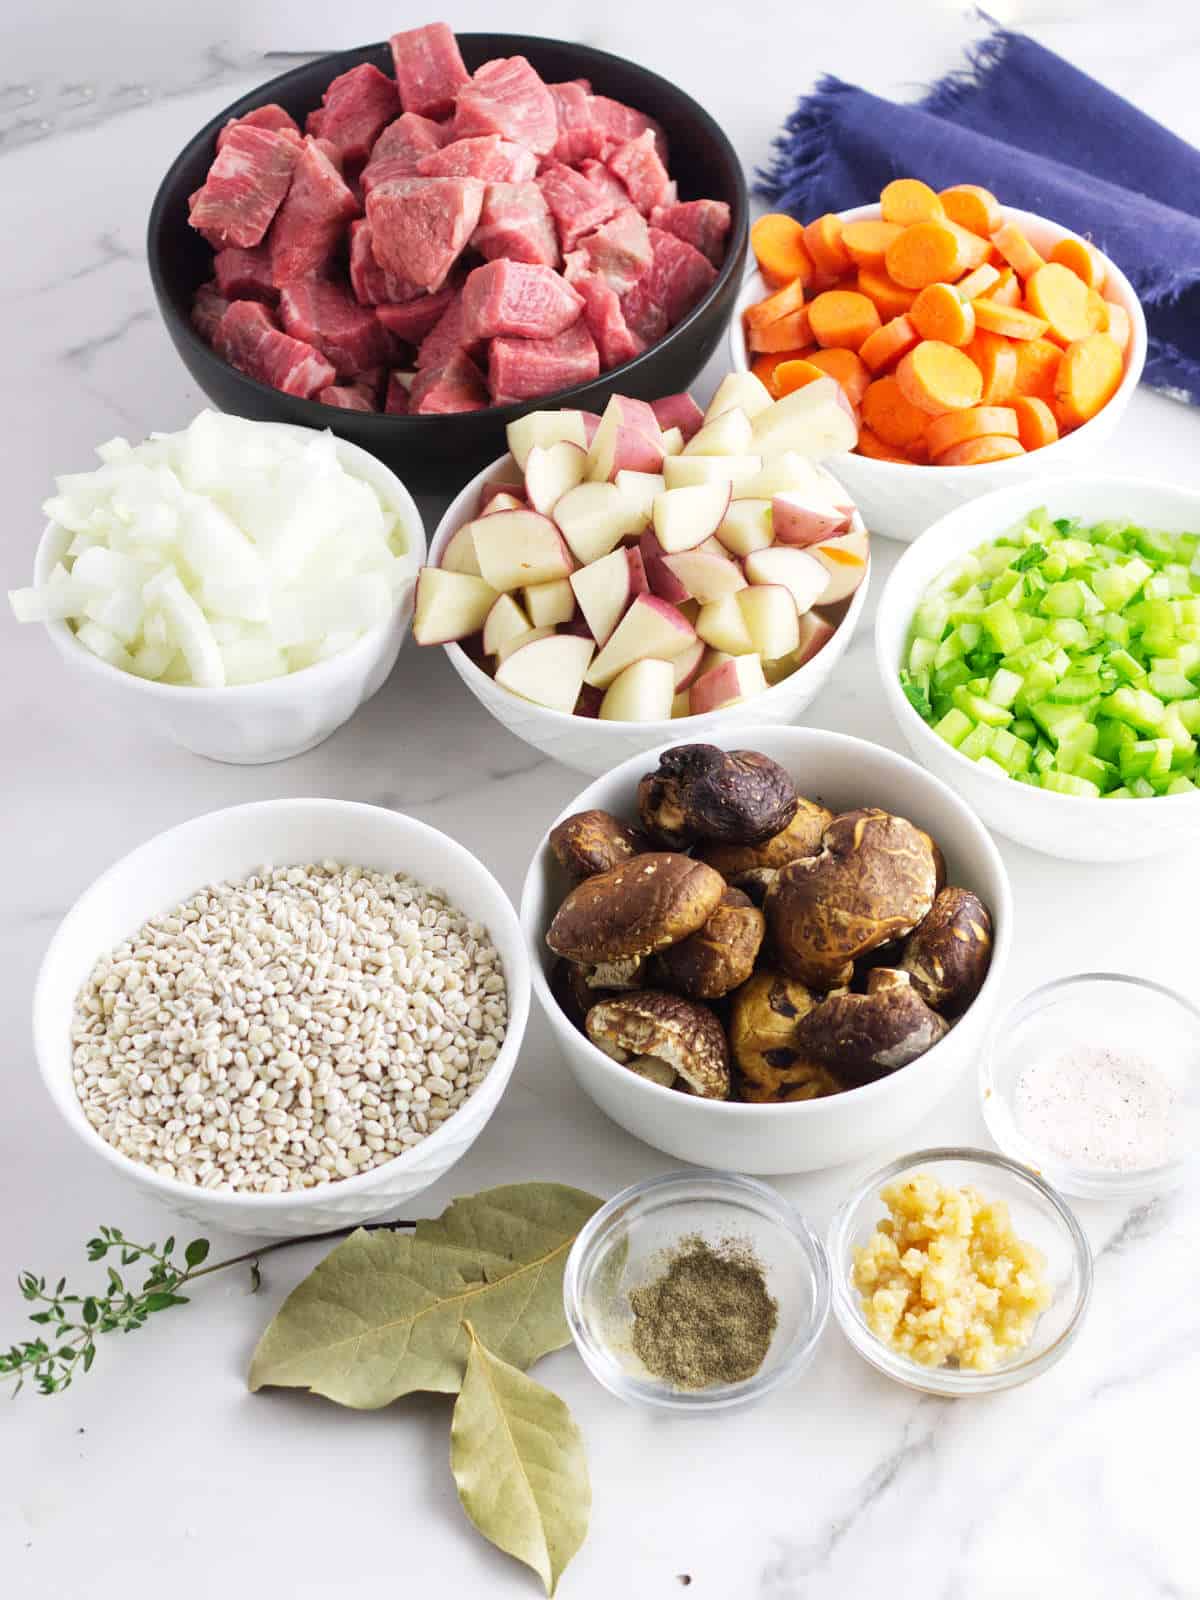 chuck beef cubes, carrot chunks diced onion, chunked red potatoes, diced celery, portobello mushrooms, bay leaves read to cook with.